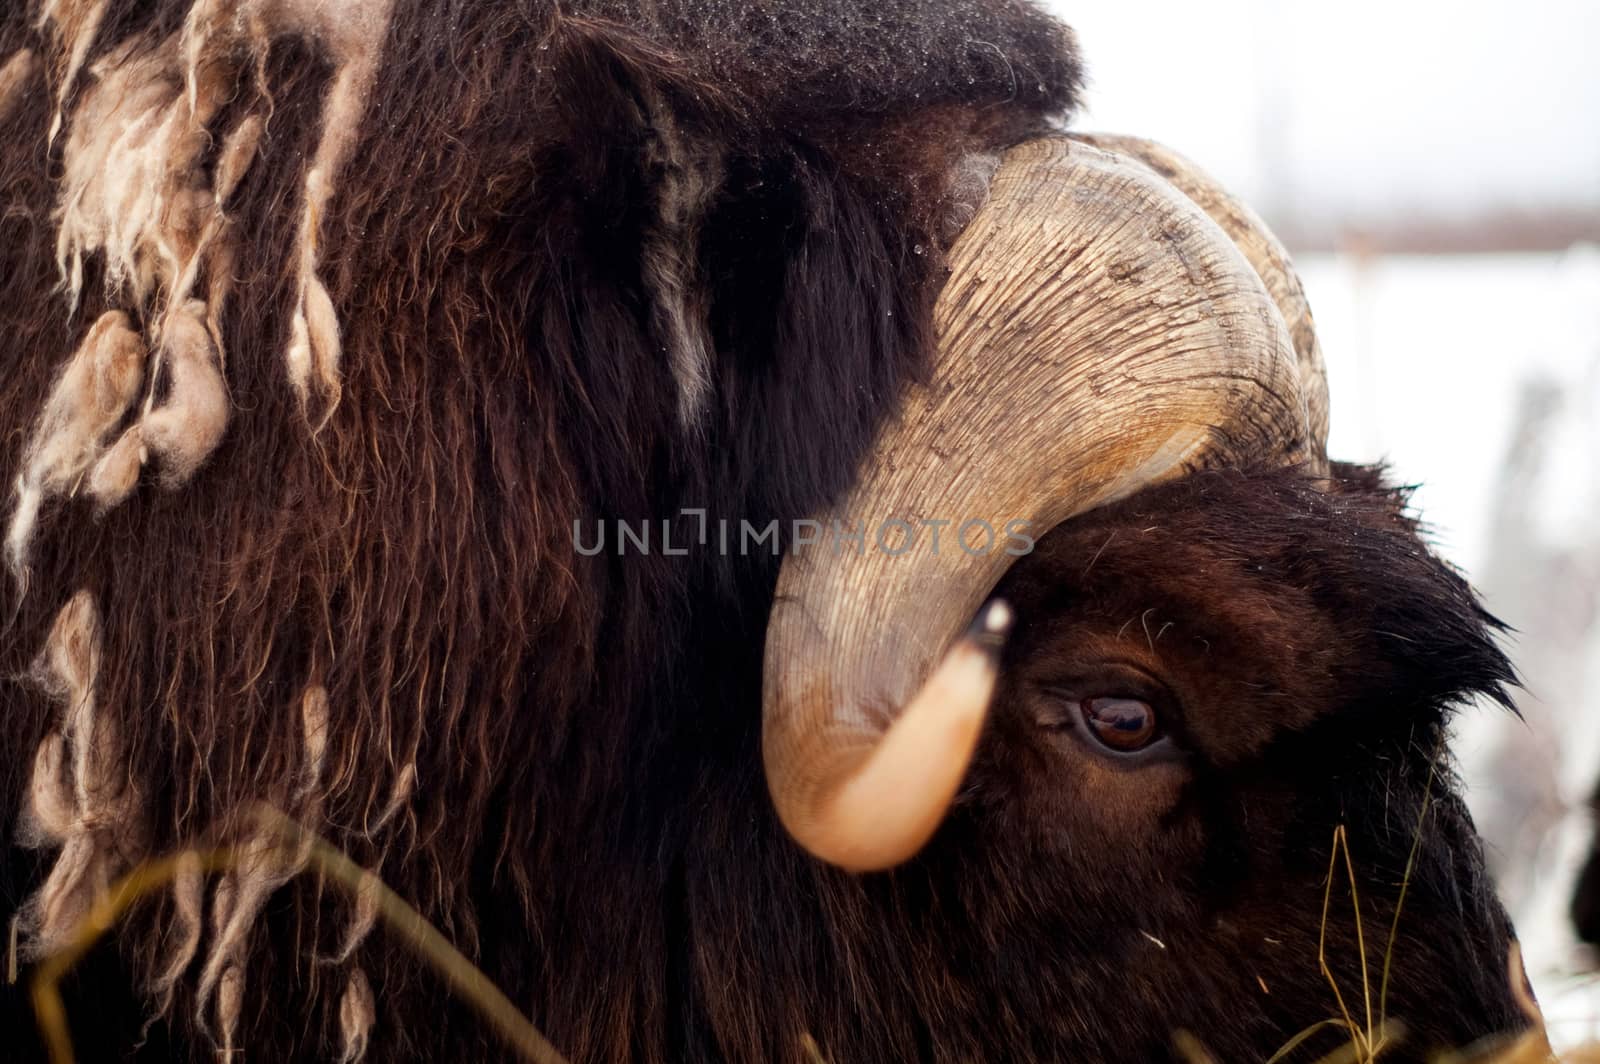 Musk Ox Portrait Wildlife Close up Horns and Eye by ChrisBoswell